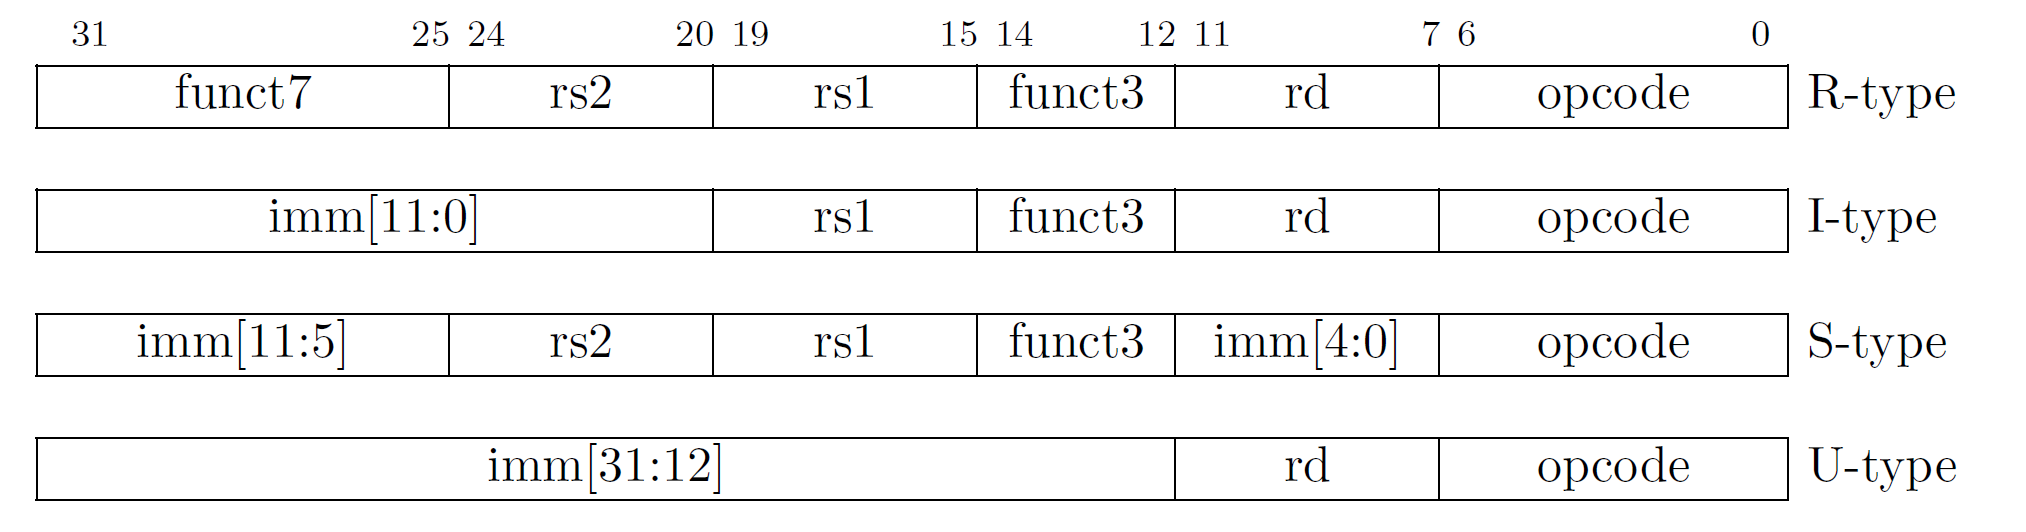 RISC-V’s four base instruction formats are each 32 bits in length, but the ISA encoding scheme supports extensions that are any combination of 16-bit instruction parcels, including 16, 32, 48 bits, etc. RISC-V instruction sets supporting 16, 32 and 64-bit address spaces are defined and a 128-bit variant is already outlined to support future advances in memory technology. Source: RISC-V Foundation